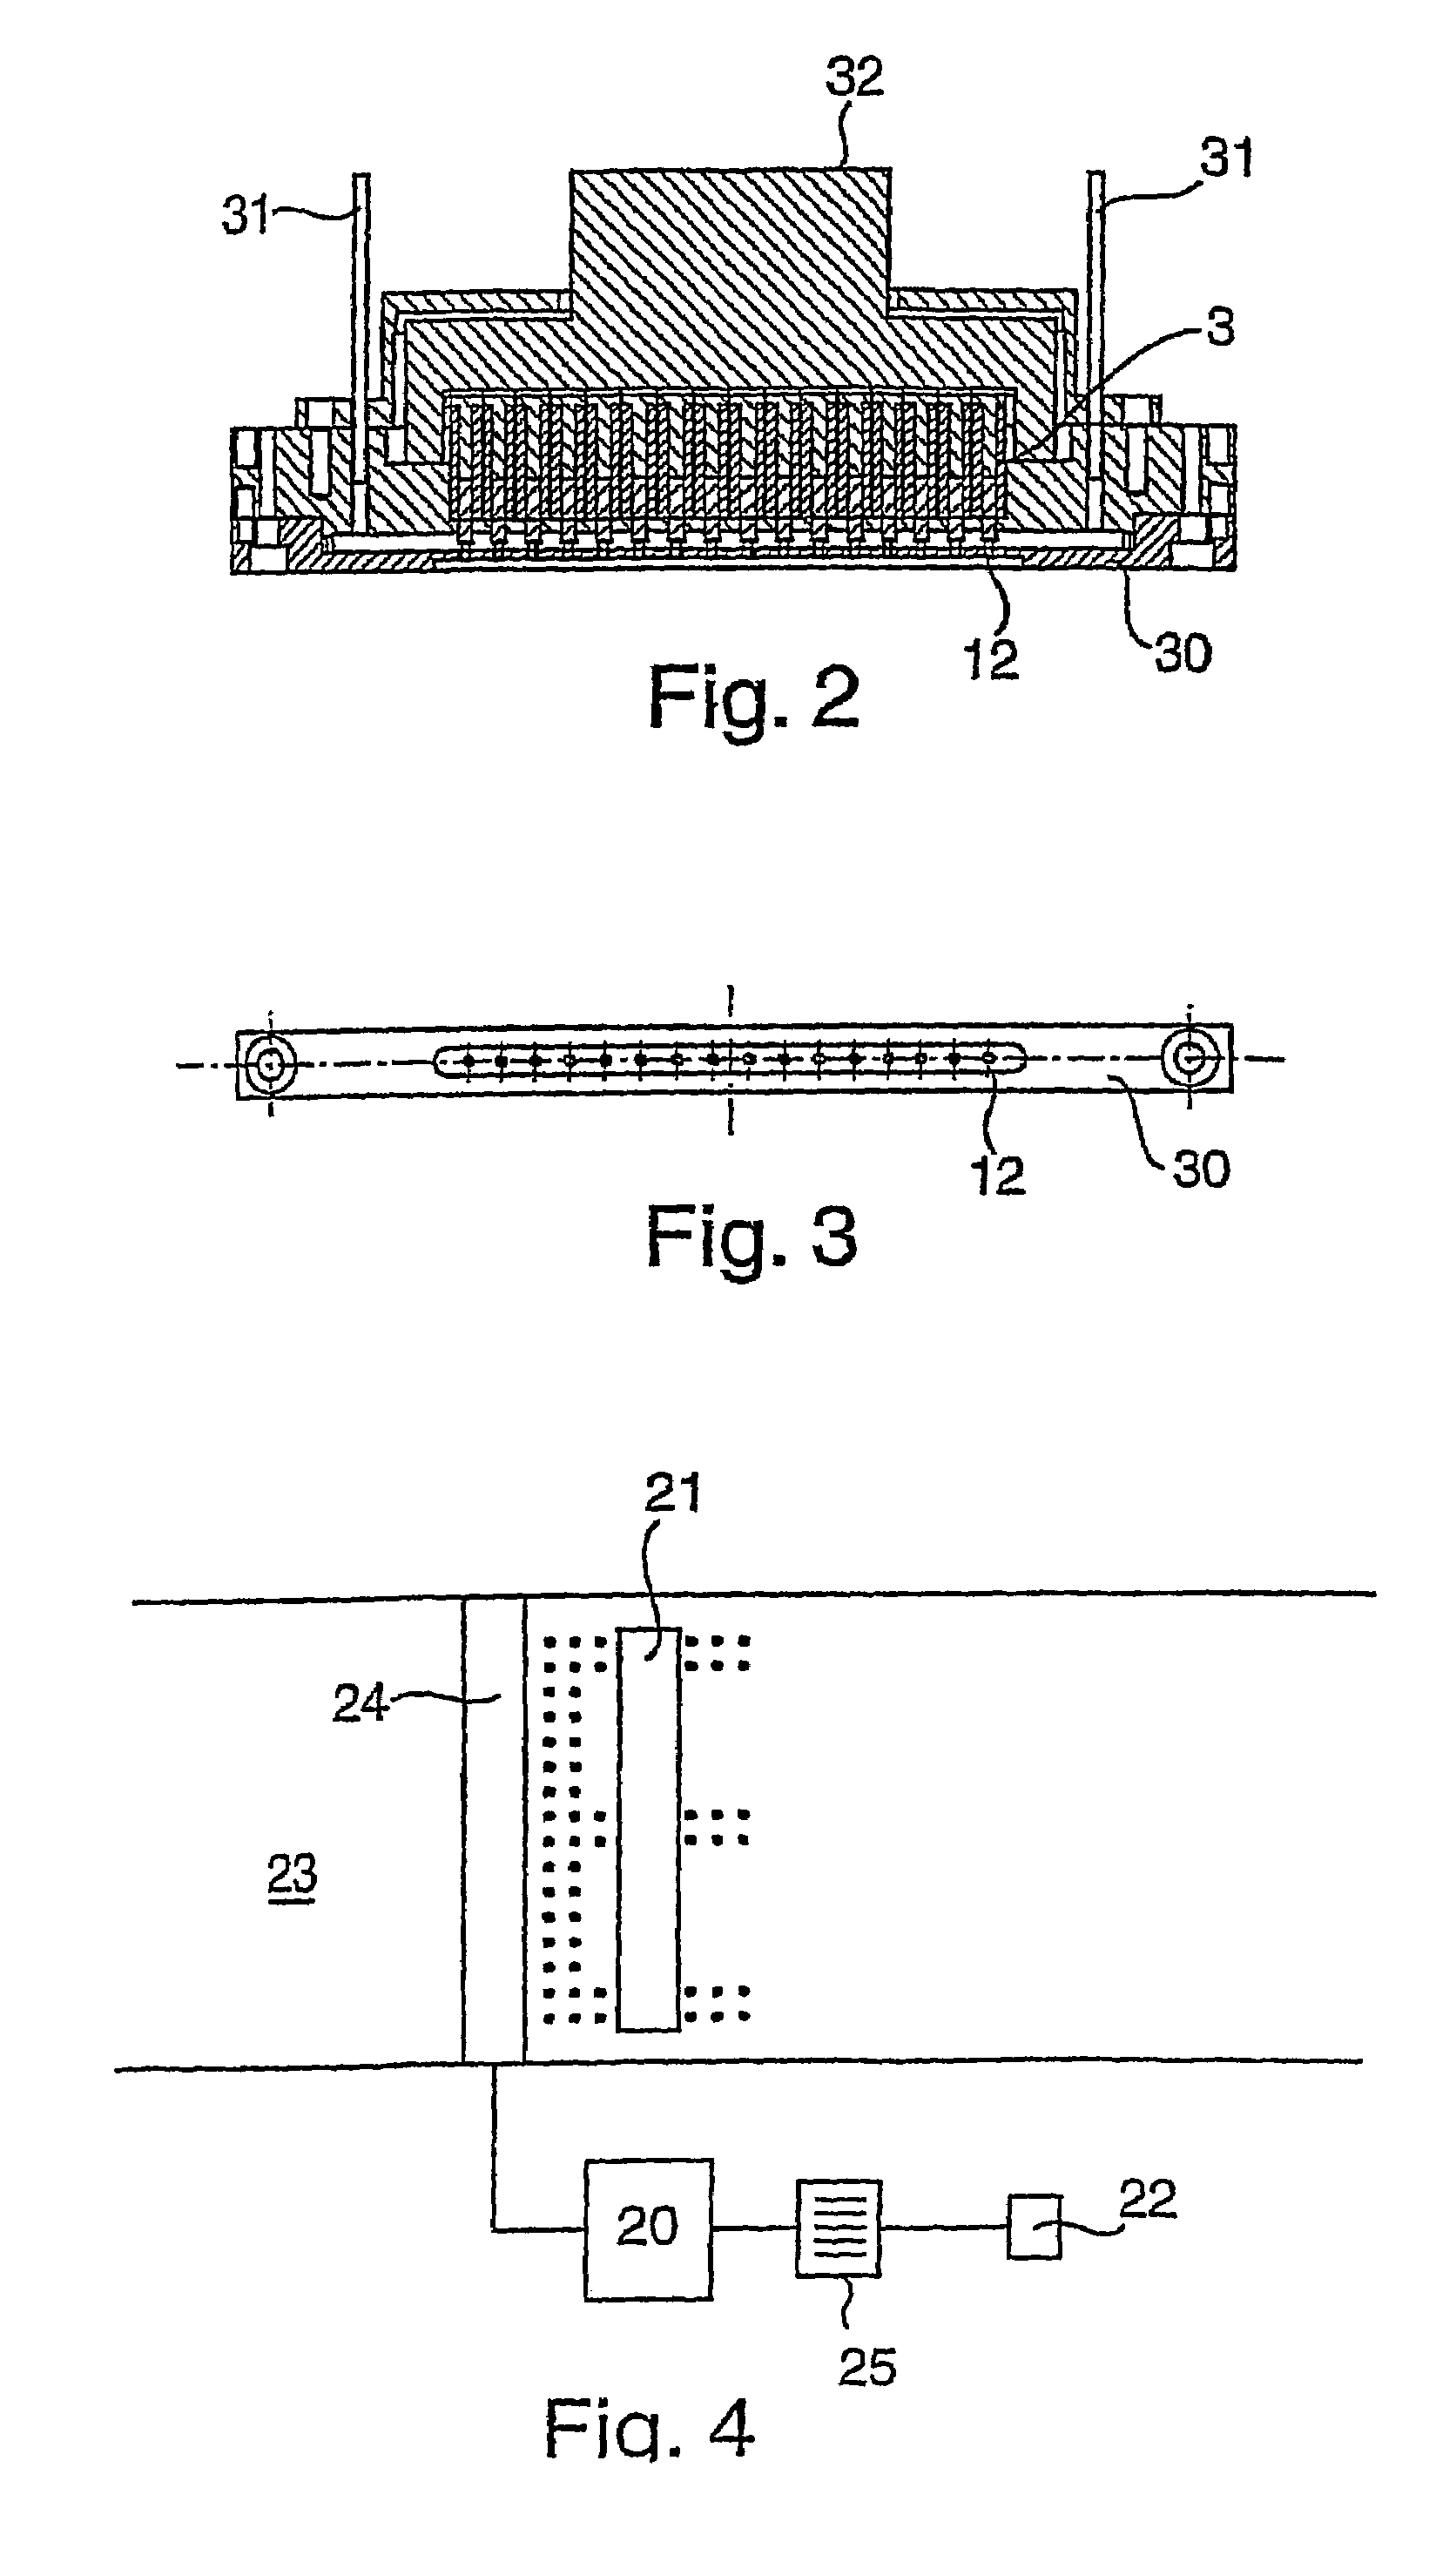 System and method for providing image forming composition on a substrate using a drop on demand ink printer